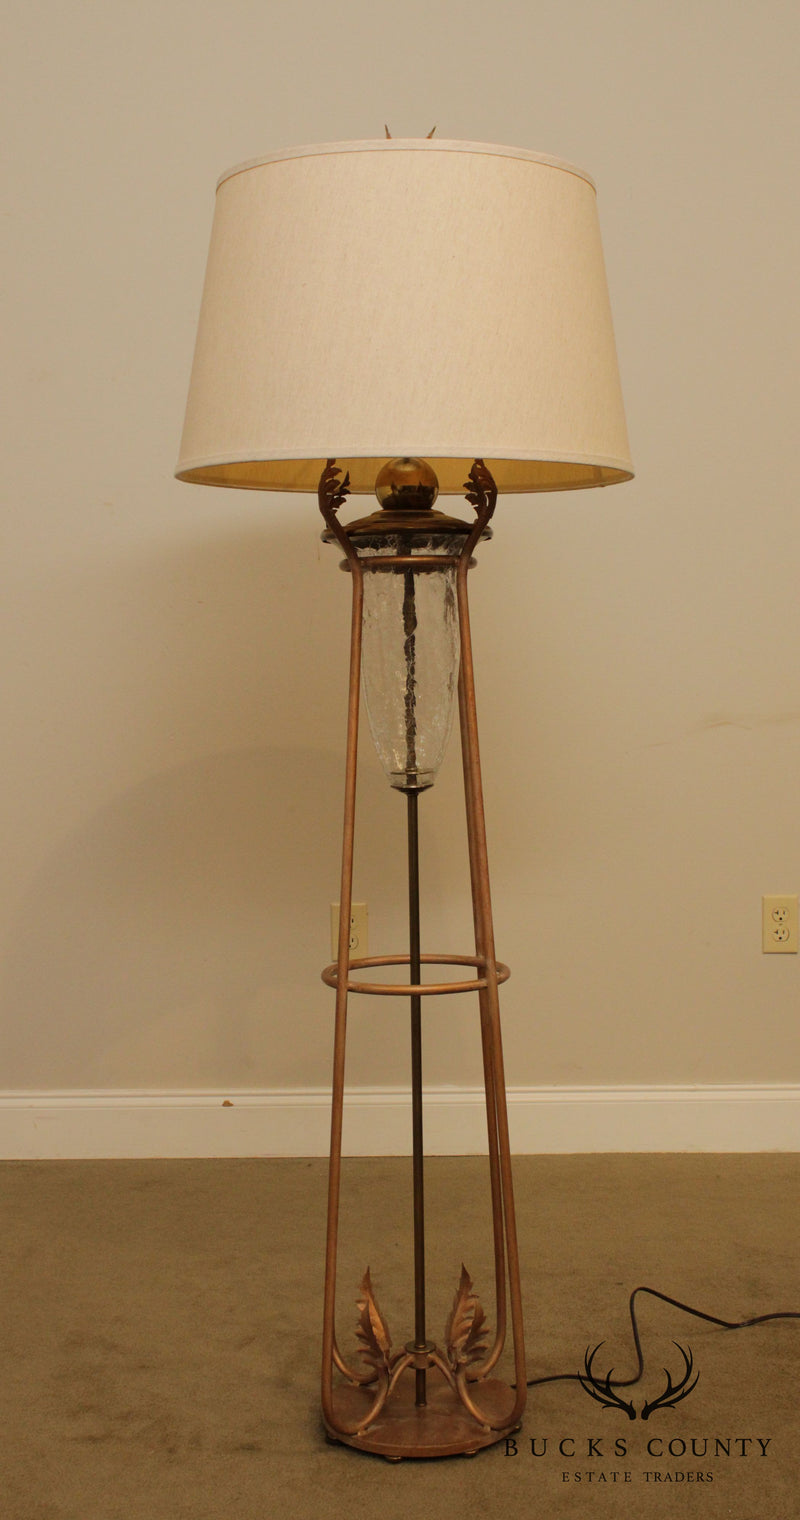 Vintage Wrought Iron and Glass Floor Lamp